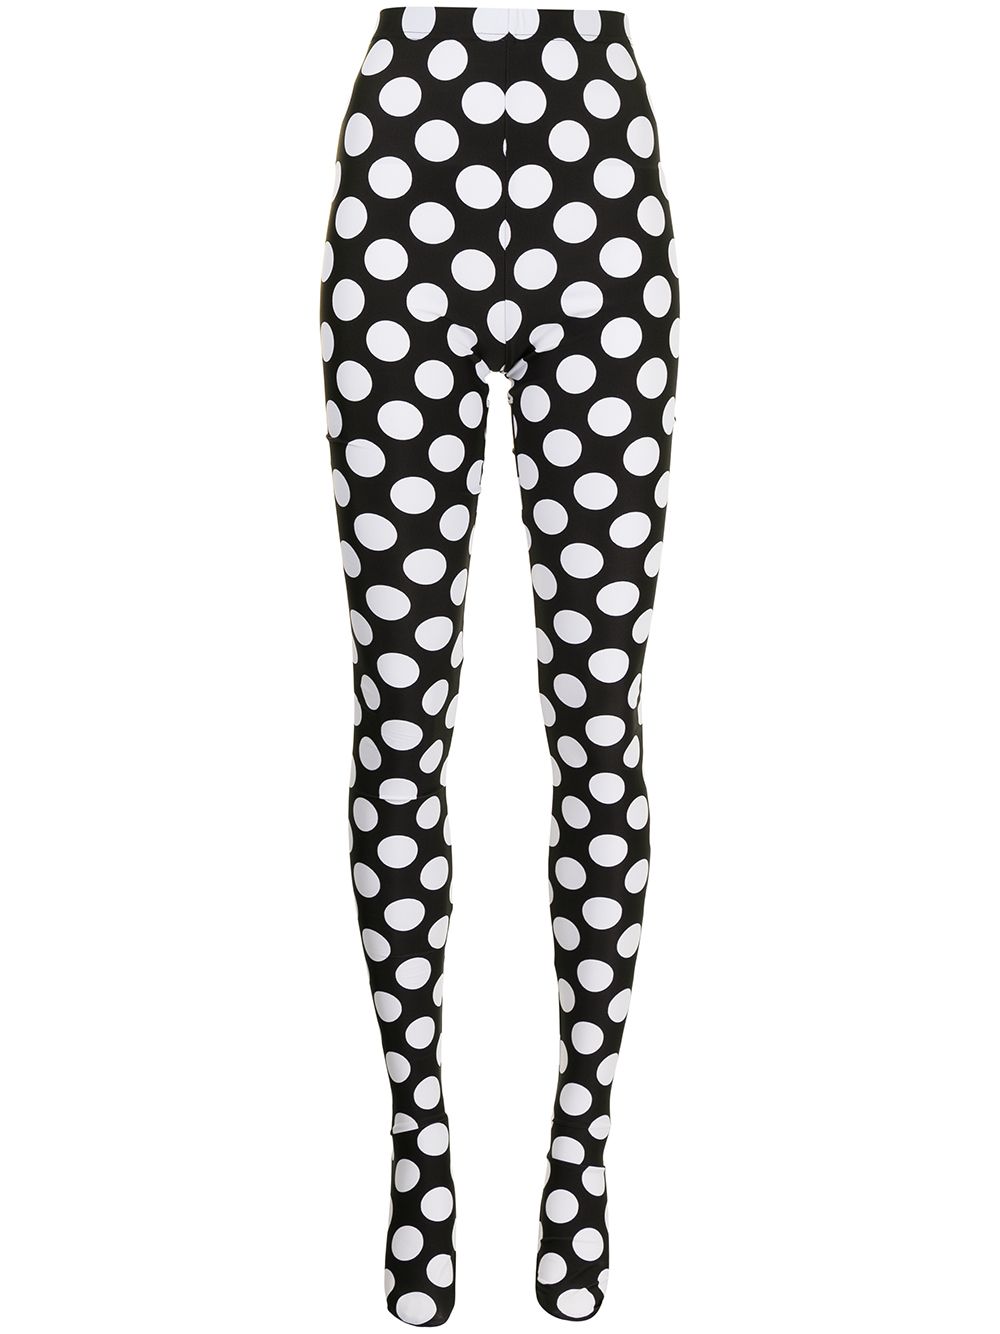 Stylish Tights to Bring Out Your Inner Street Style Star